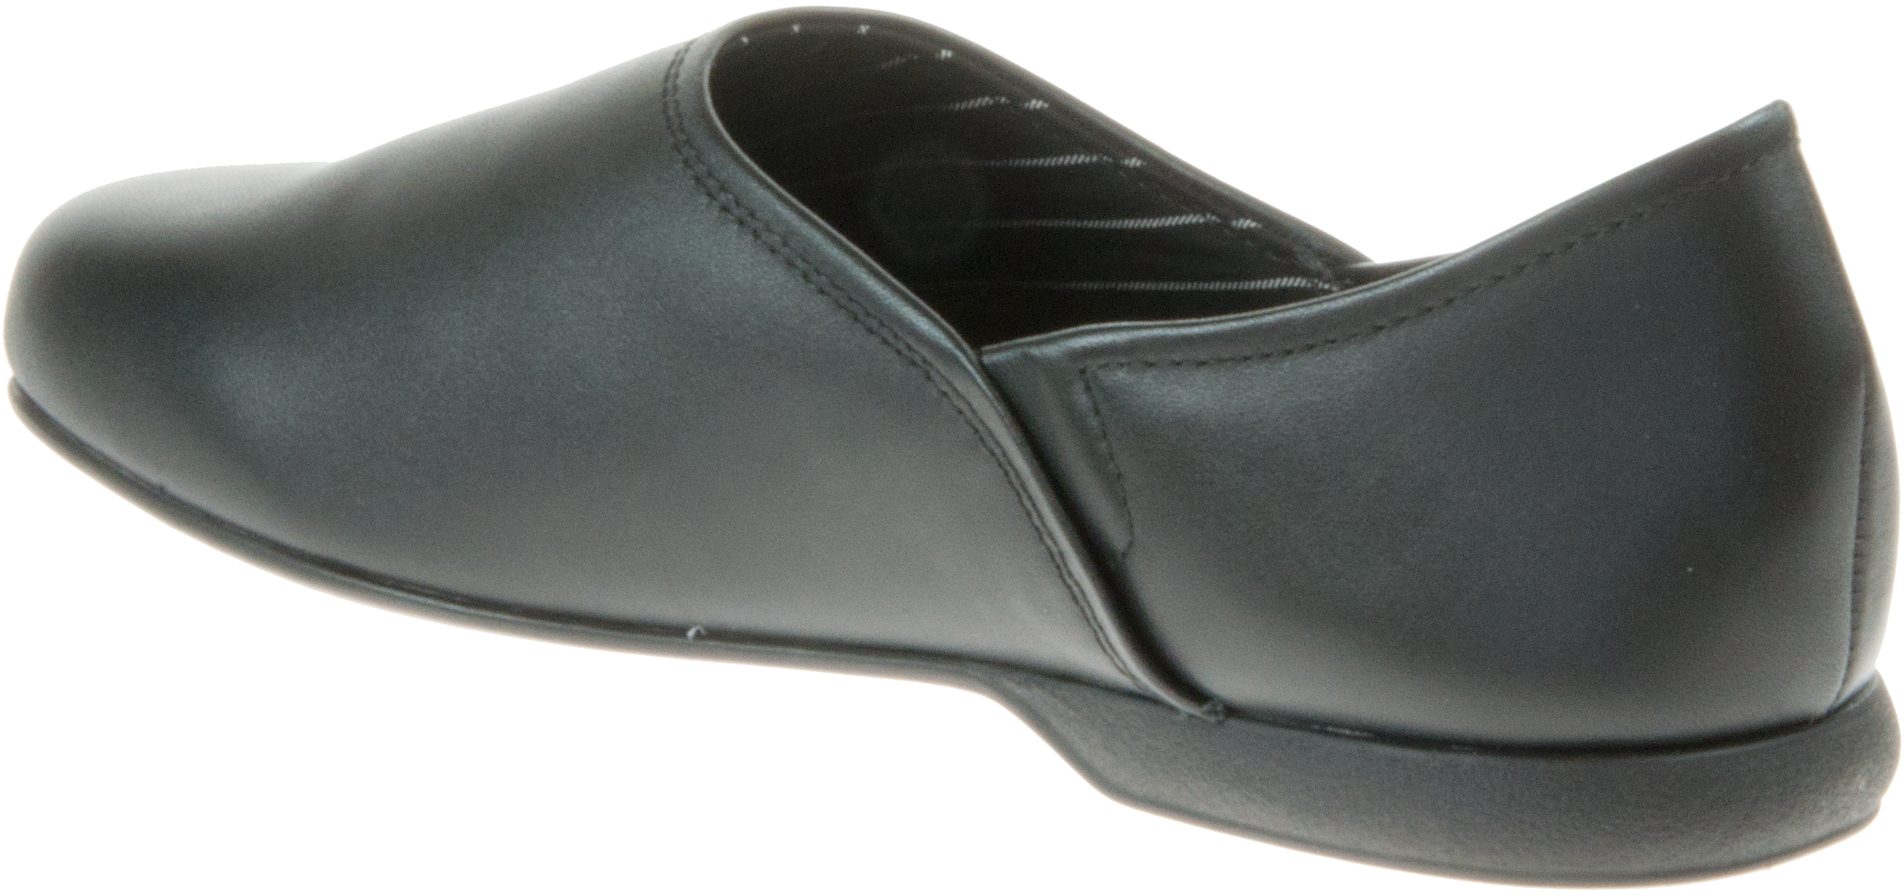 Clarks Harston Elite Black Leather 26144720 - Full Slippers - Humphries Shoes